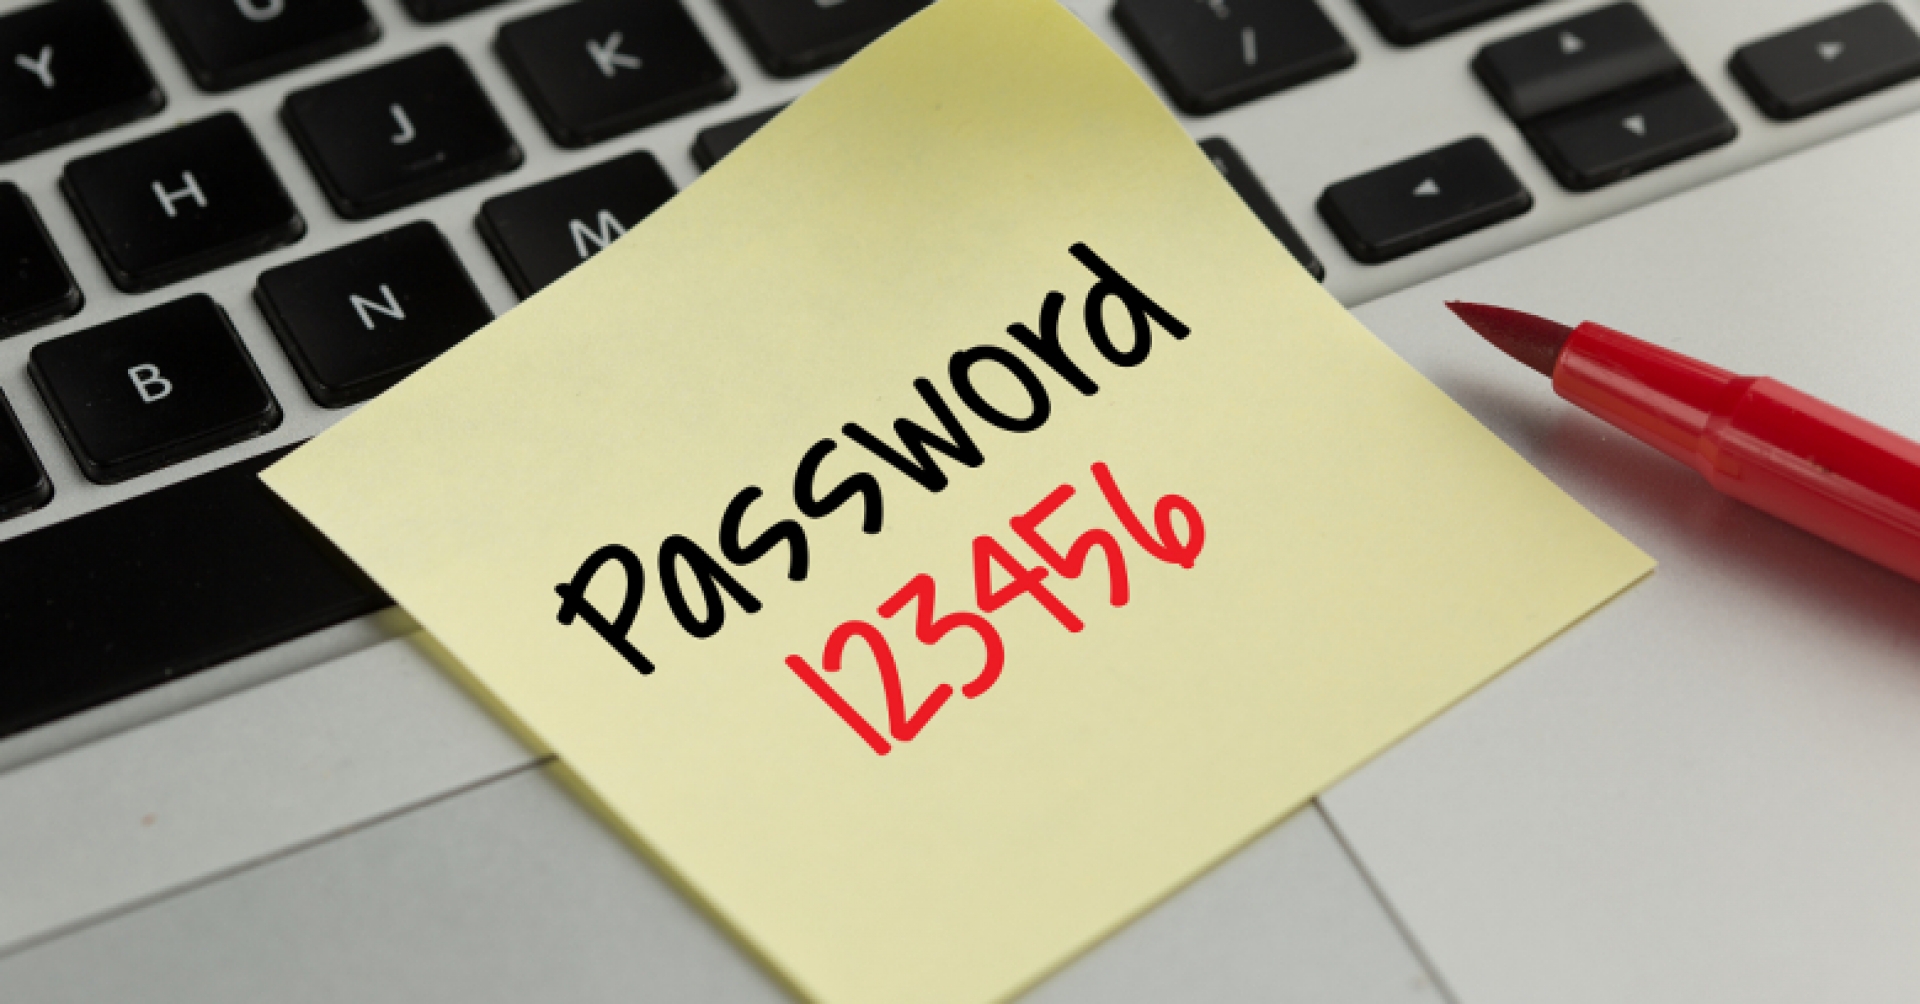 4 Passwords You Should Never Use